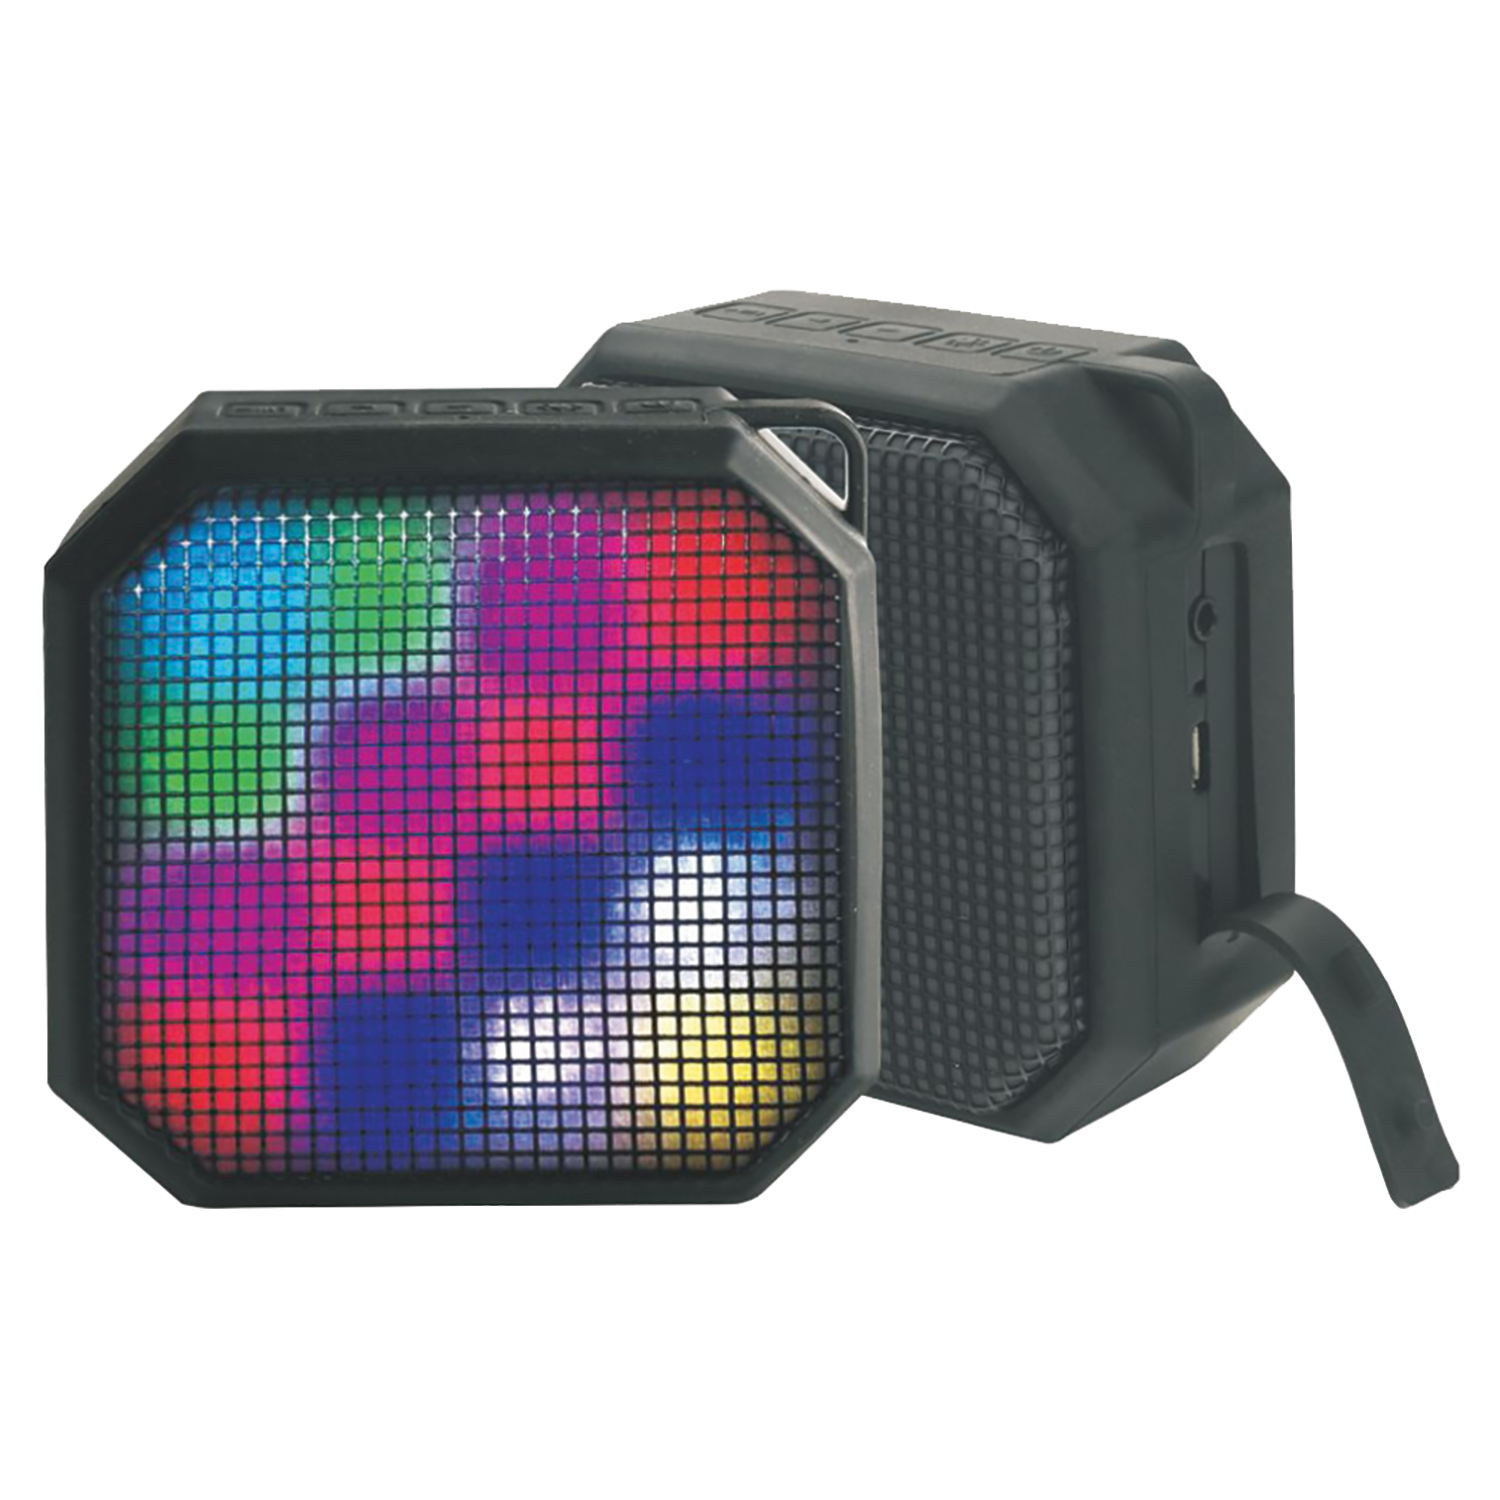 cool light up speakers